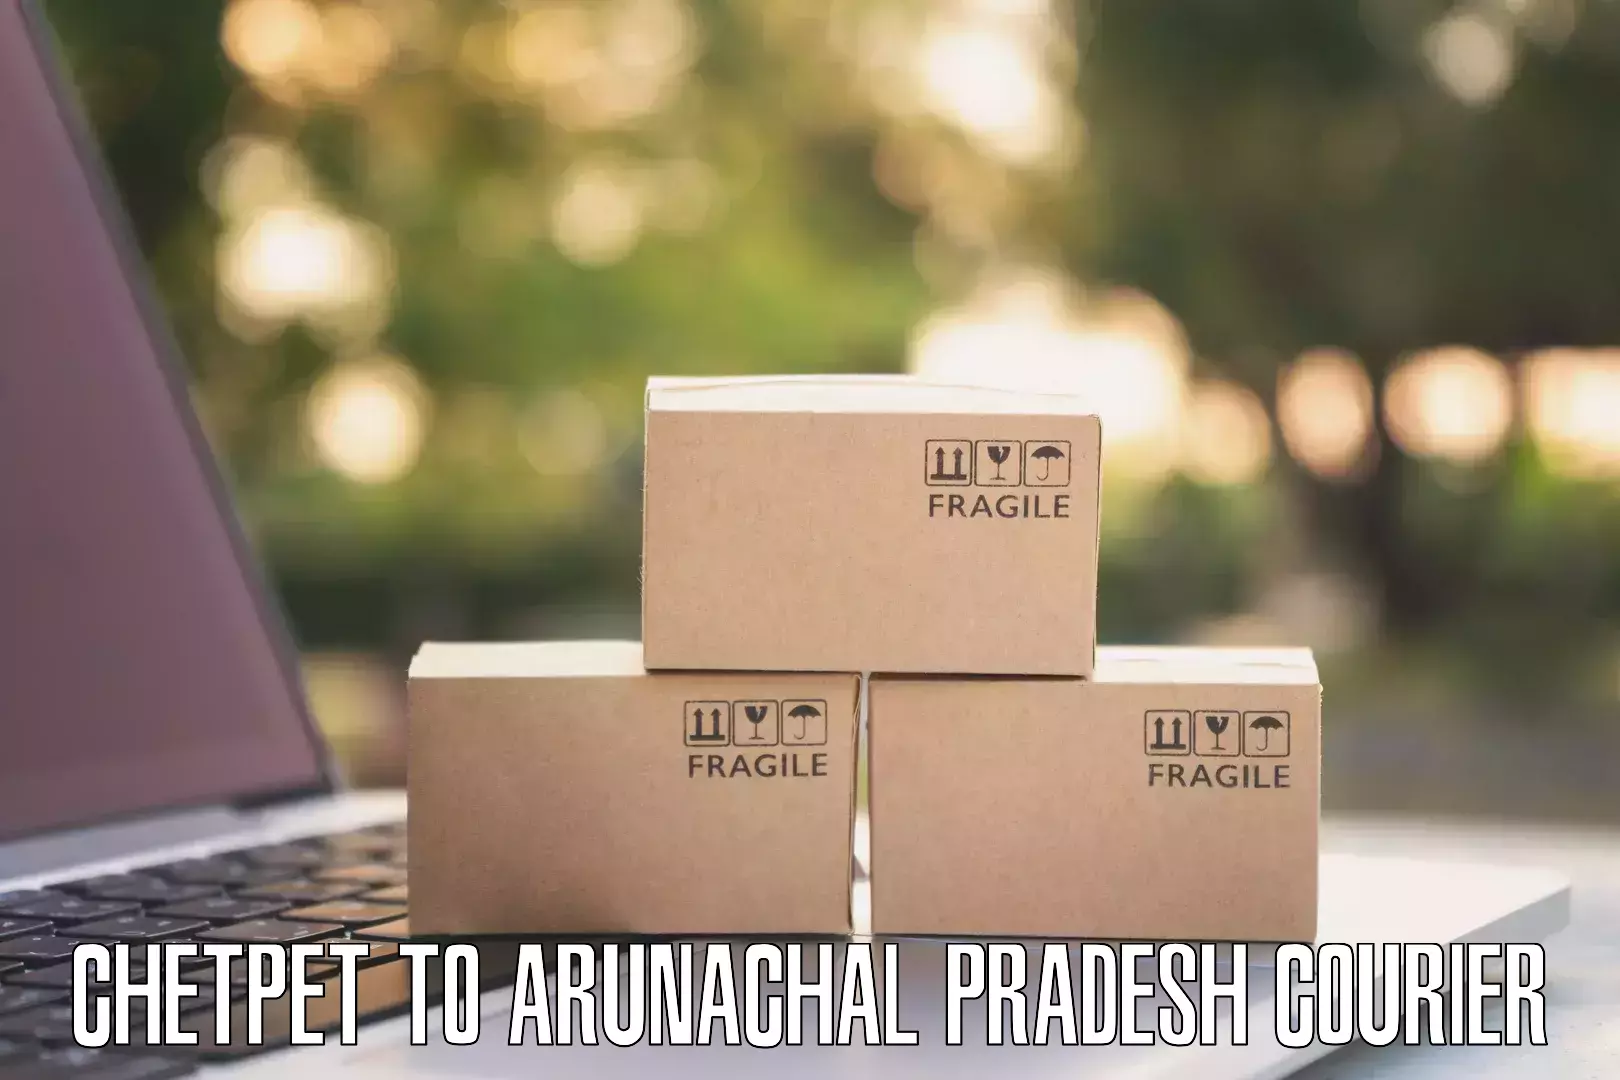 Online shipping calculator Chetpet to Aalo